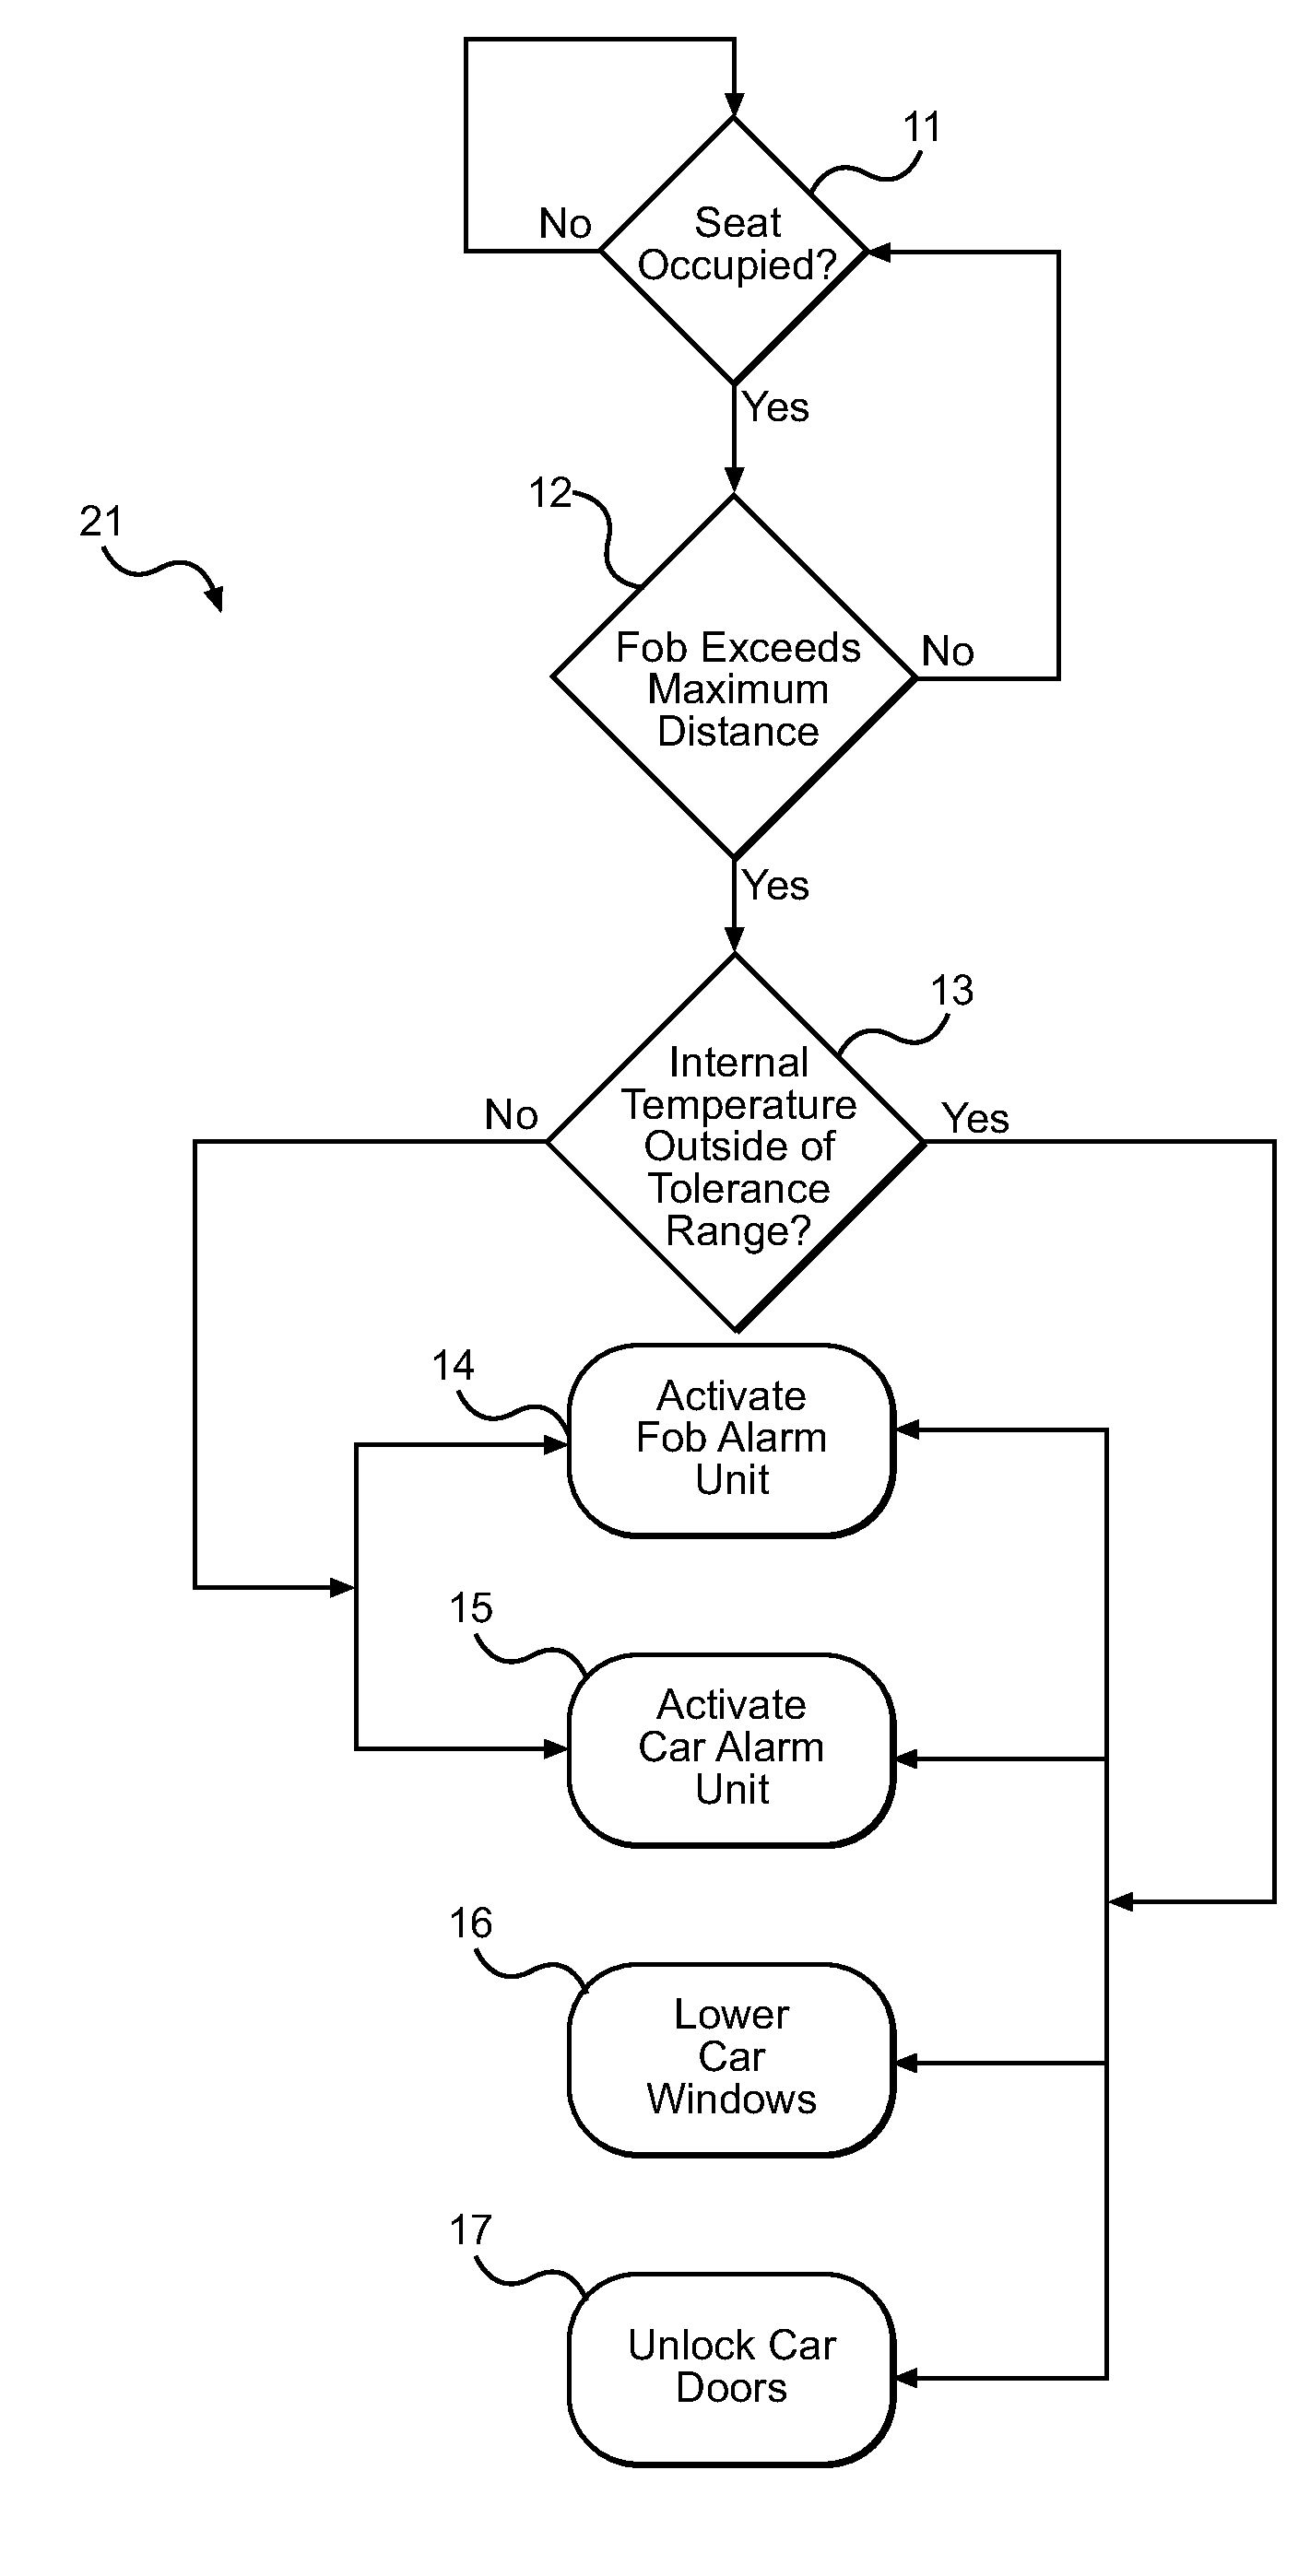 Temperature-Sensitive Vehicle Occupancy Detection and Alert System